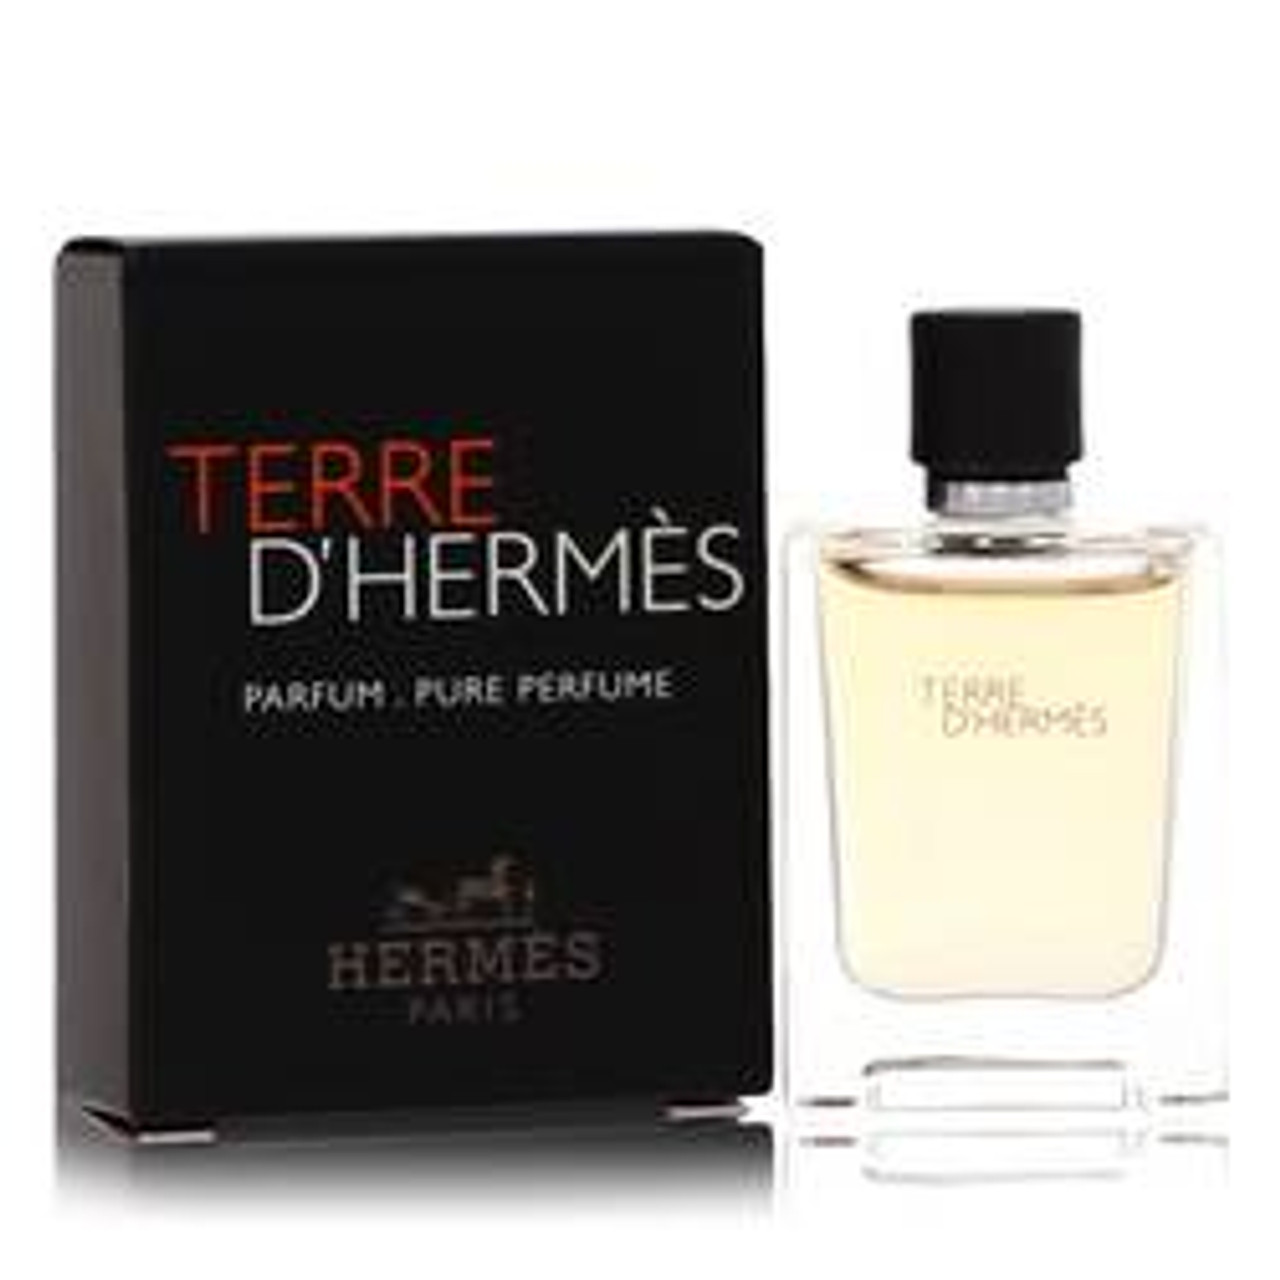 Terre D'hermes Cologne By Hermes Mini Pure Perfume 0.17 oz for Men - [From 39.00 - Choose pk Qty ] - *Ships from Miami